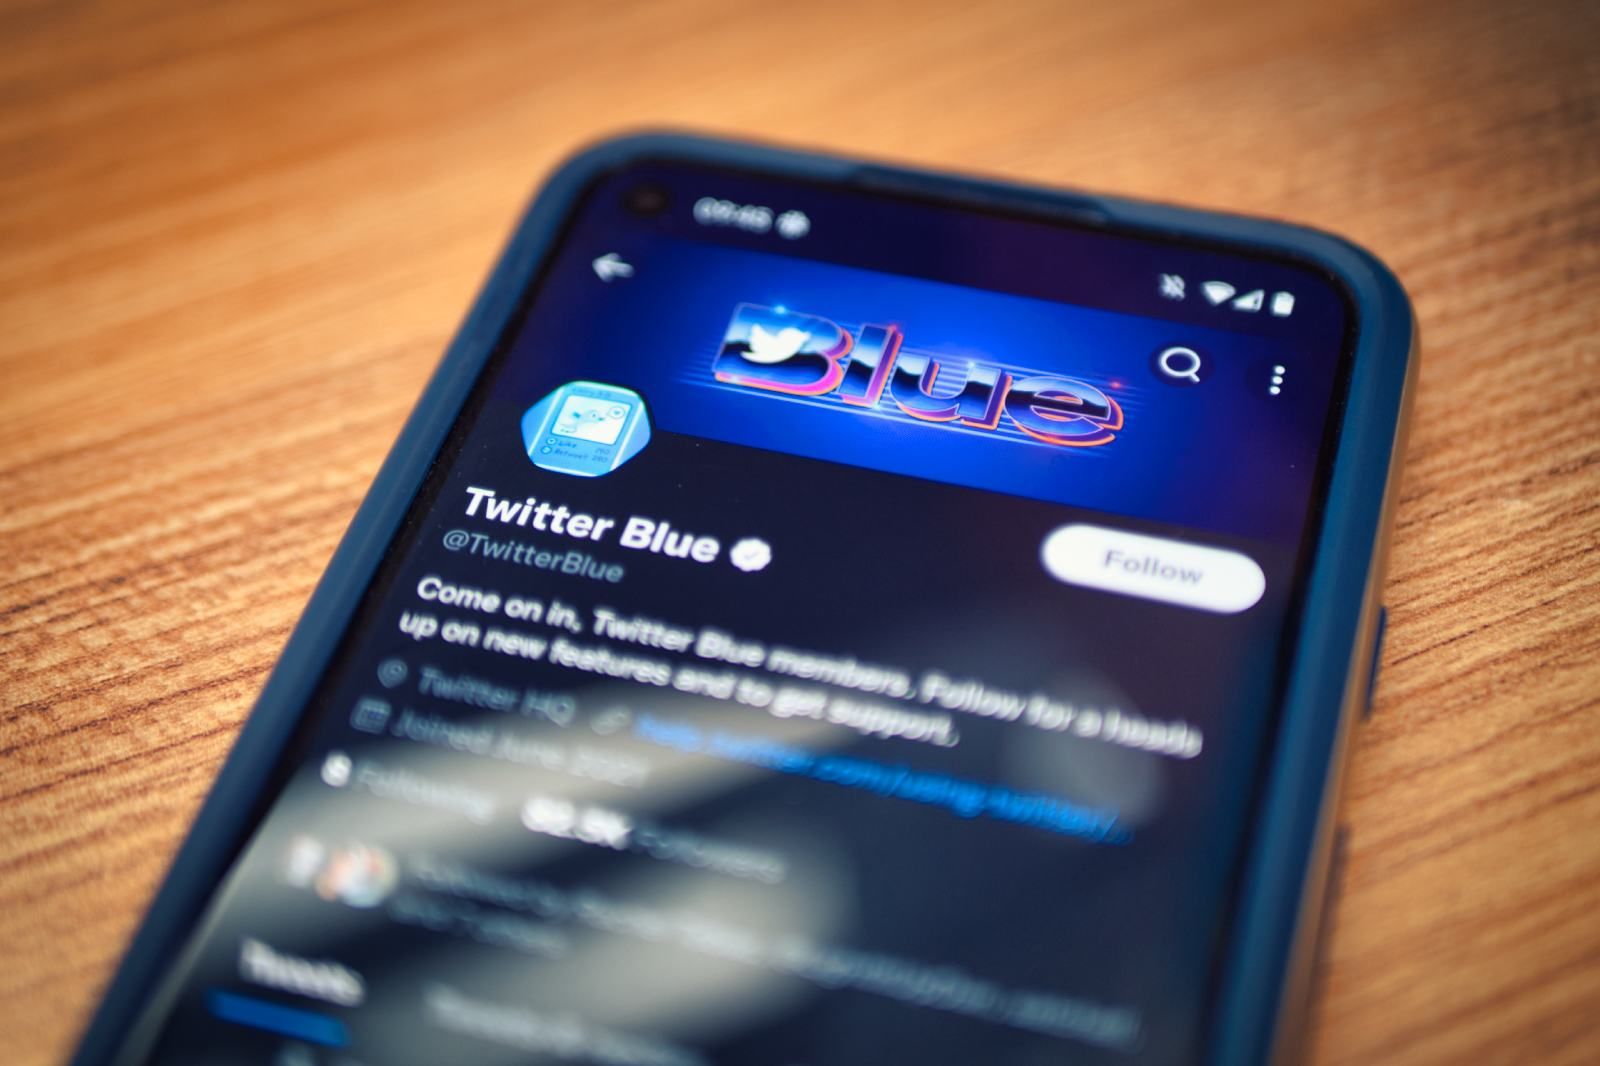 Twitter Blue twitter account shown on a smartphone